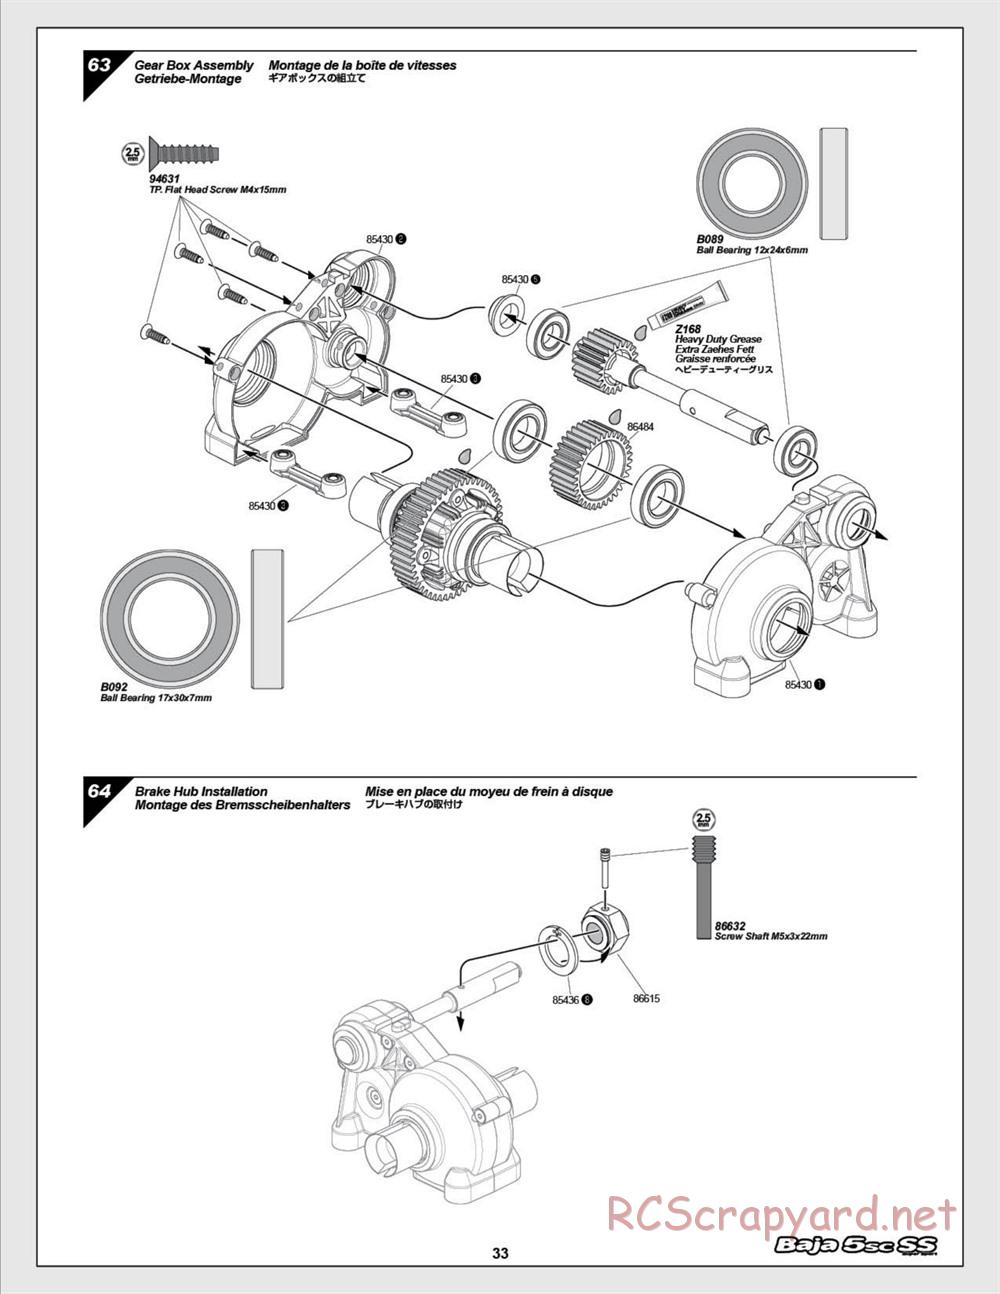 HPI - Baja 5SC SS - Exploded View - Page 33